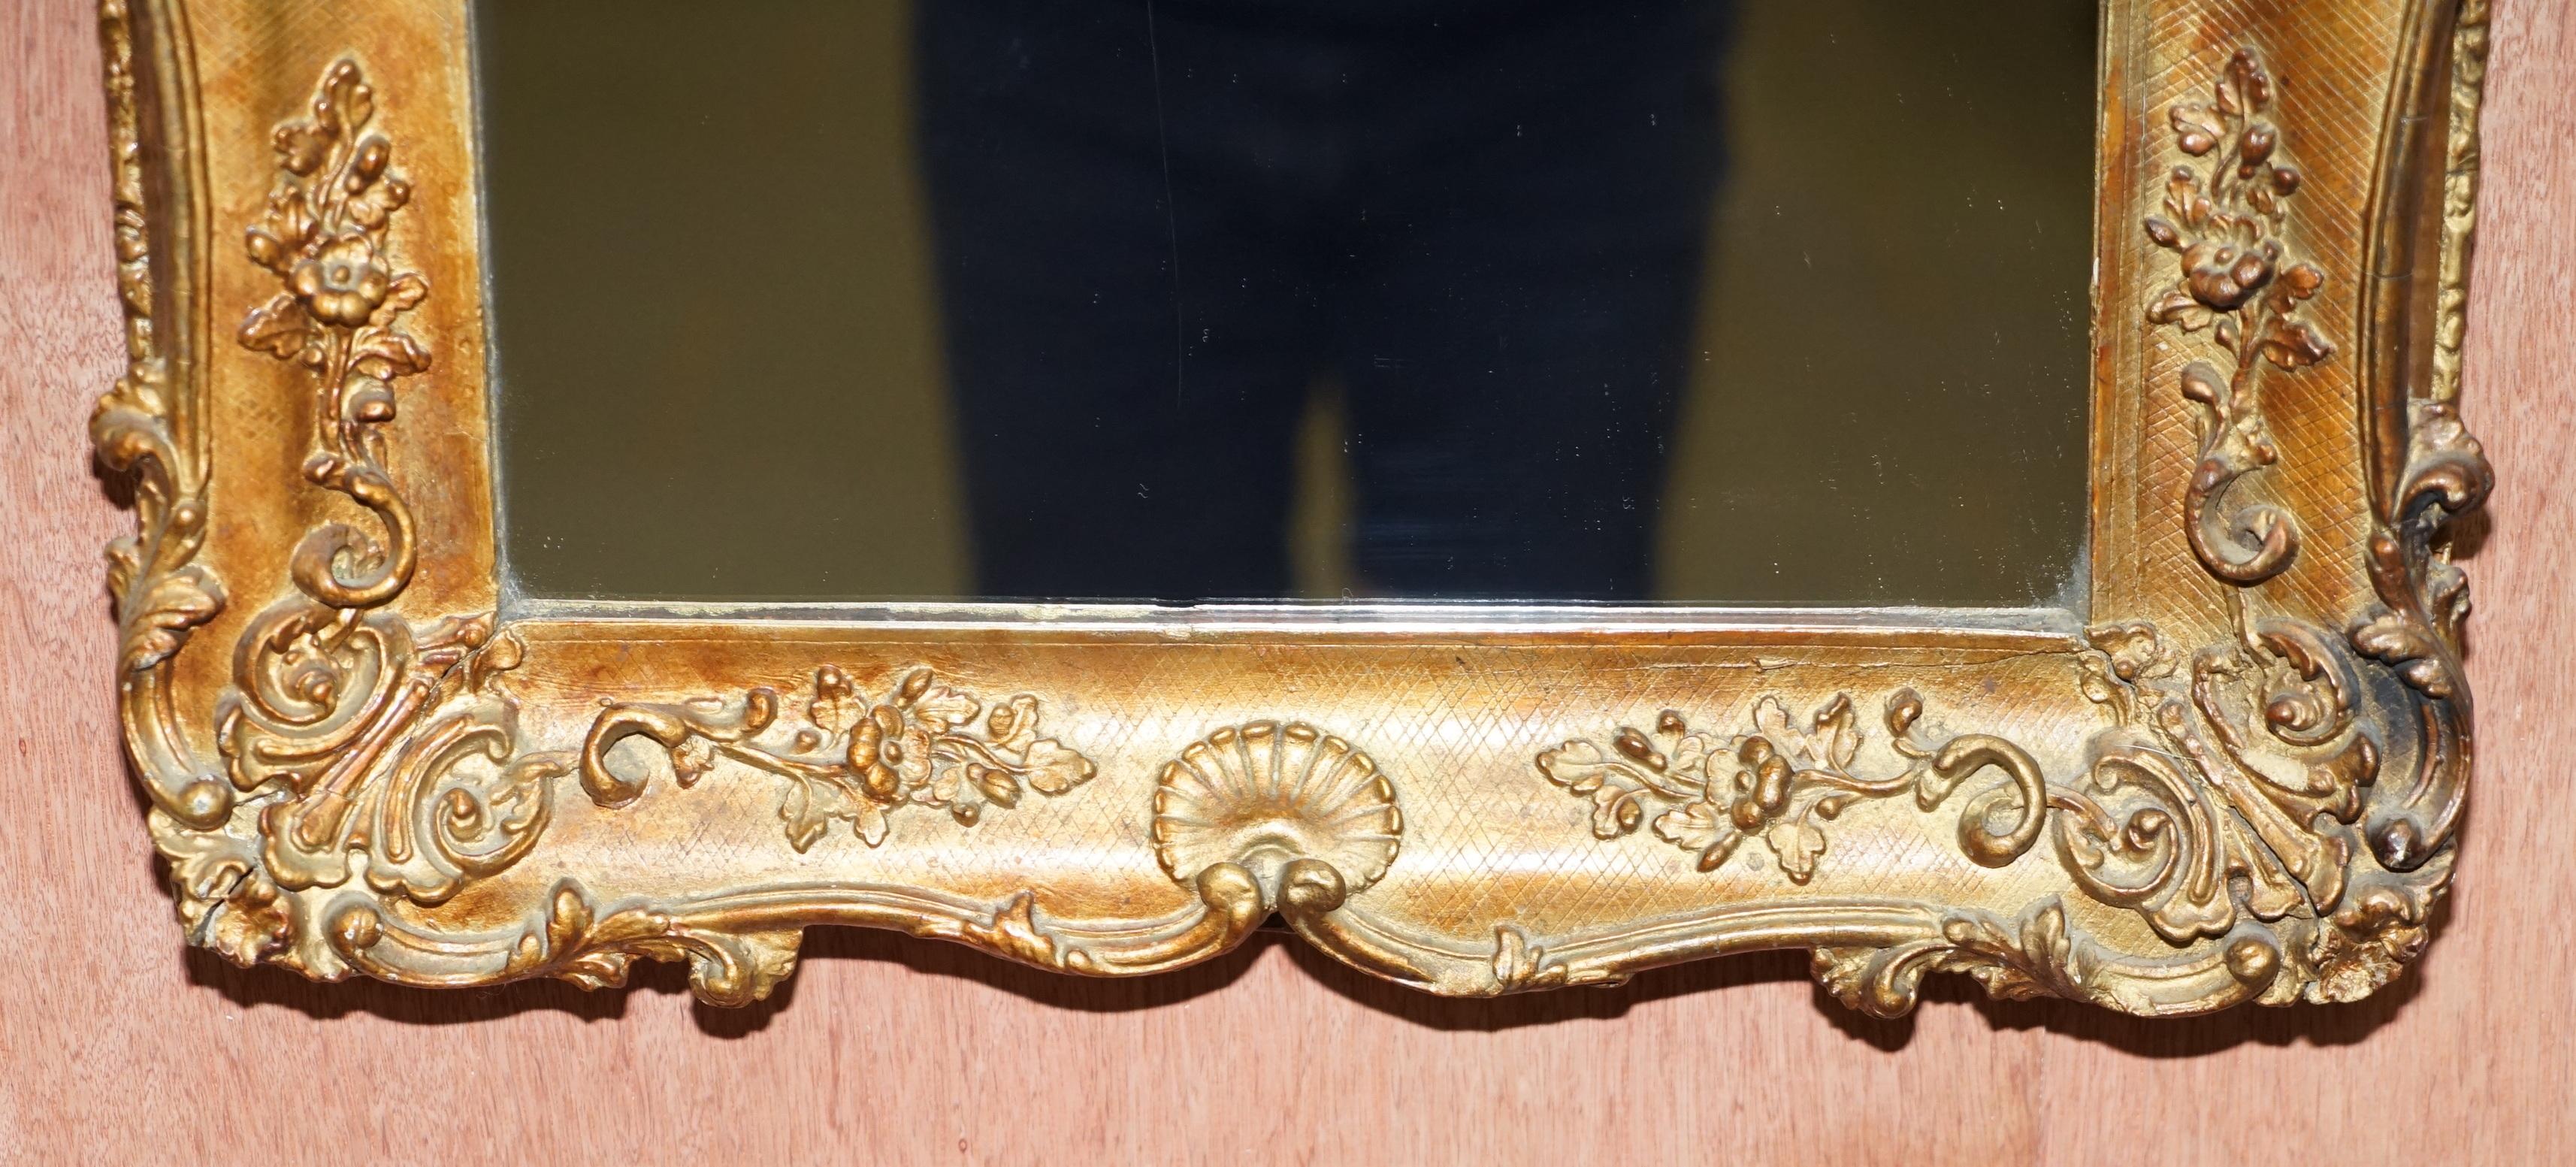 We are delighted to offer for sale this stunning ornately carved giltwood framed French mirror, circa 1880-1900

A very good looking and decorative wall mirror, clearly French, based on the early Rococo designs. This would be classed as a small